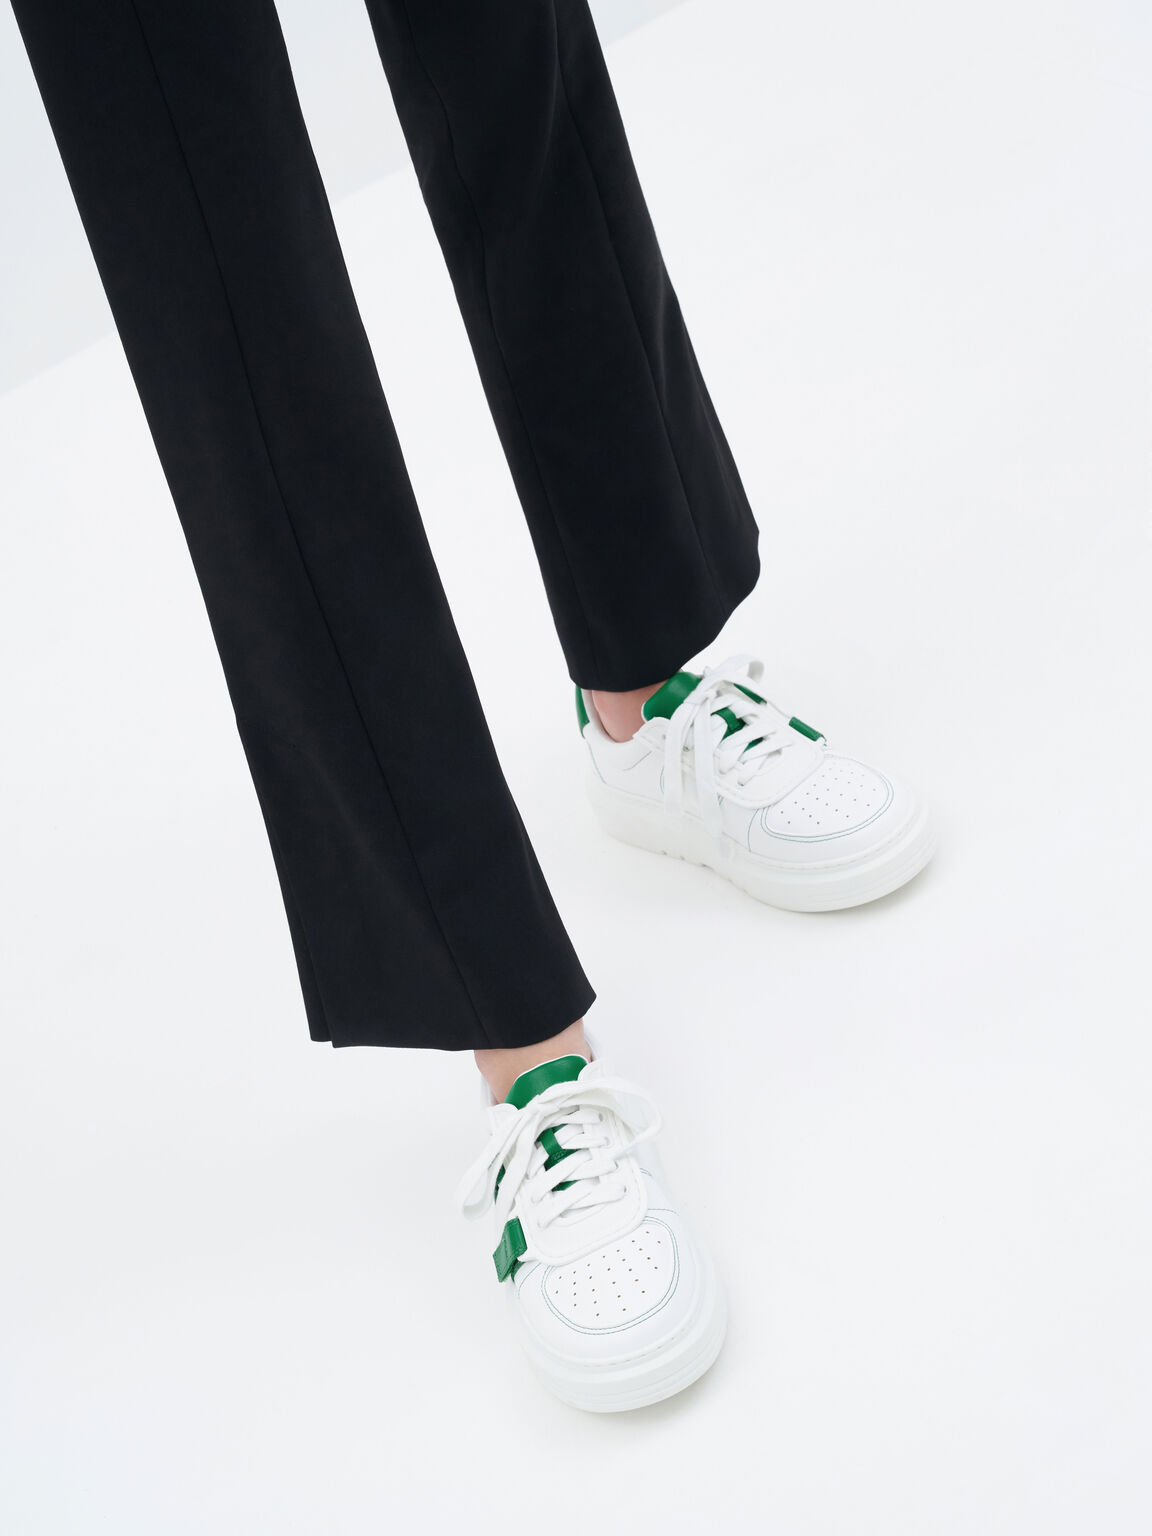 Lace-Up Velcro Sneakers, Green, hi-res